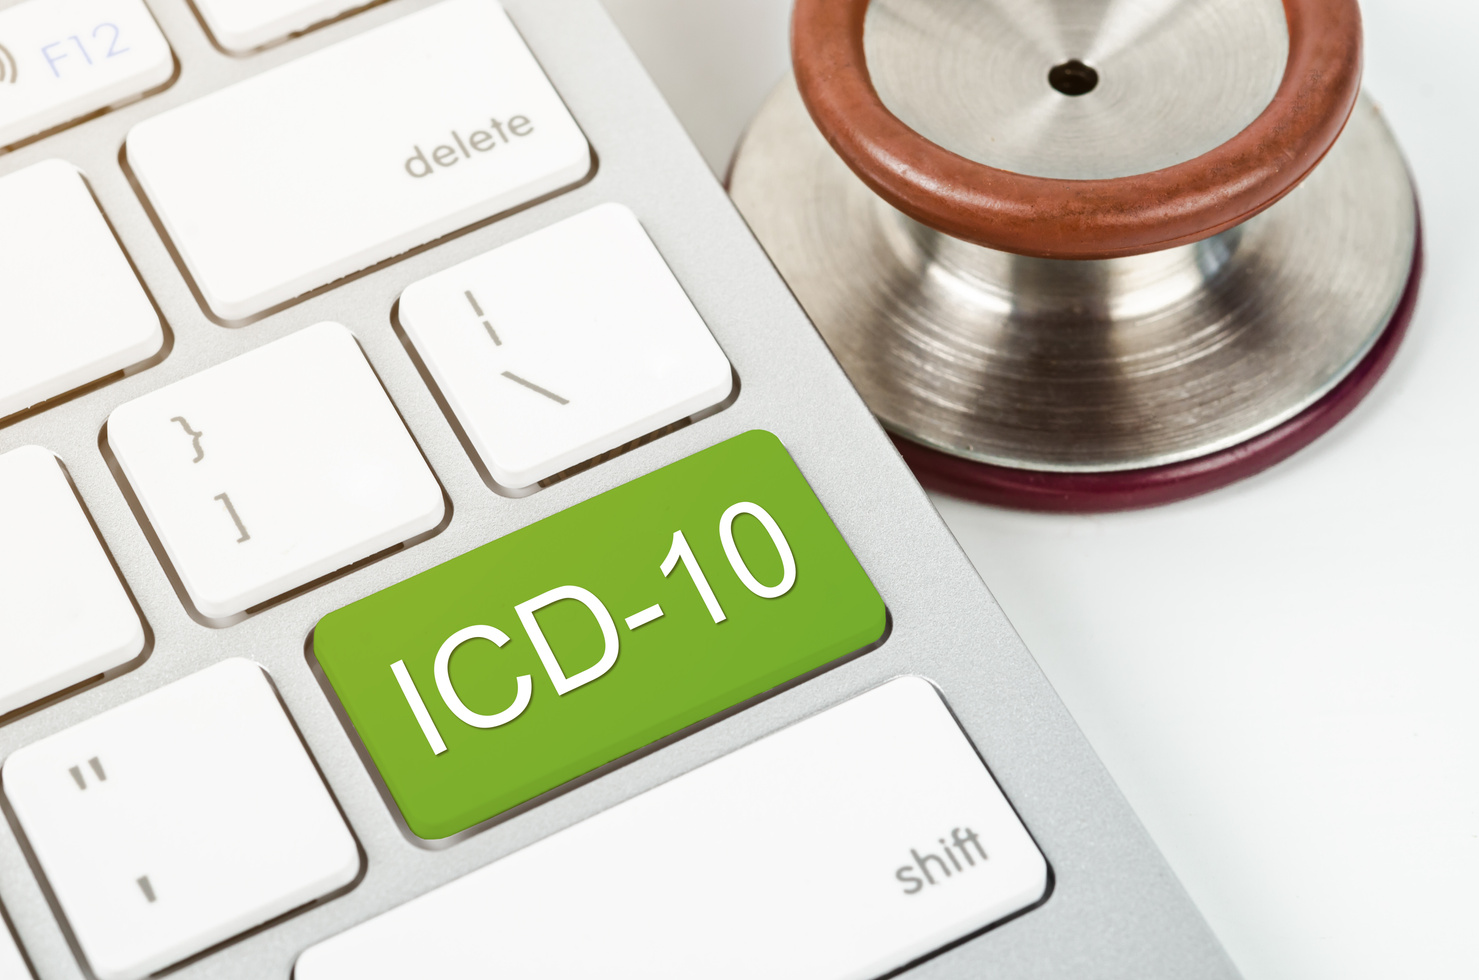 International Classification of Diseases and Related Health Problem 10th Revision or ICD-10